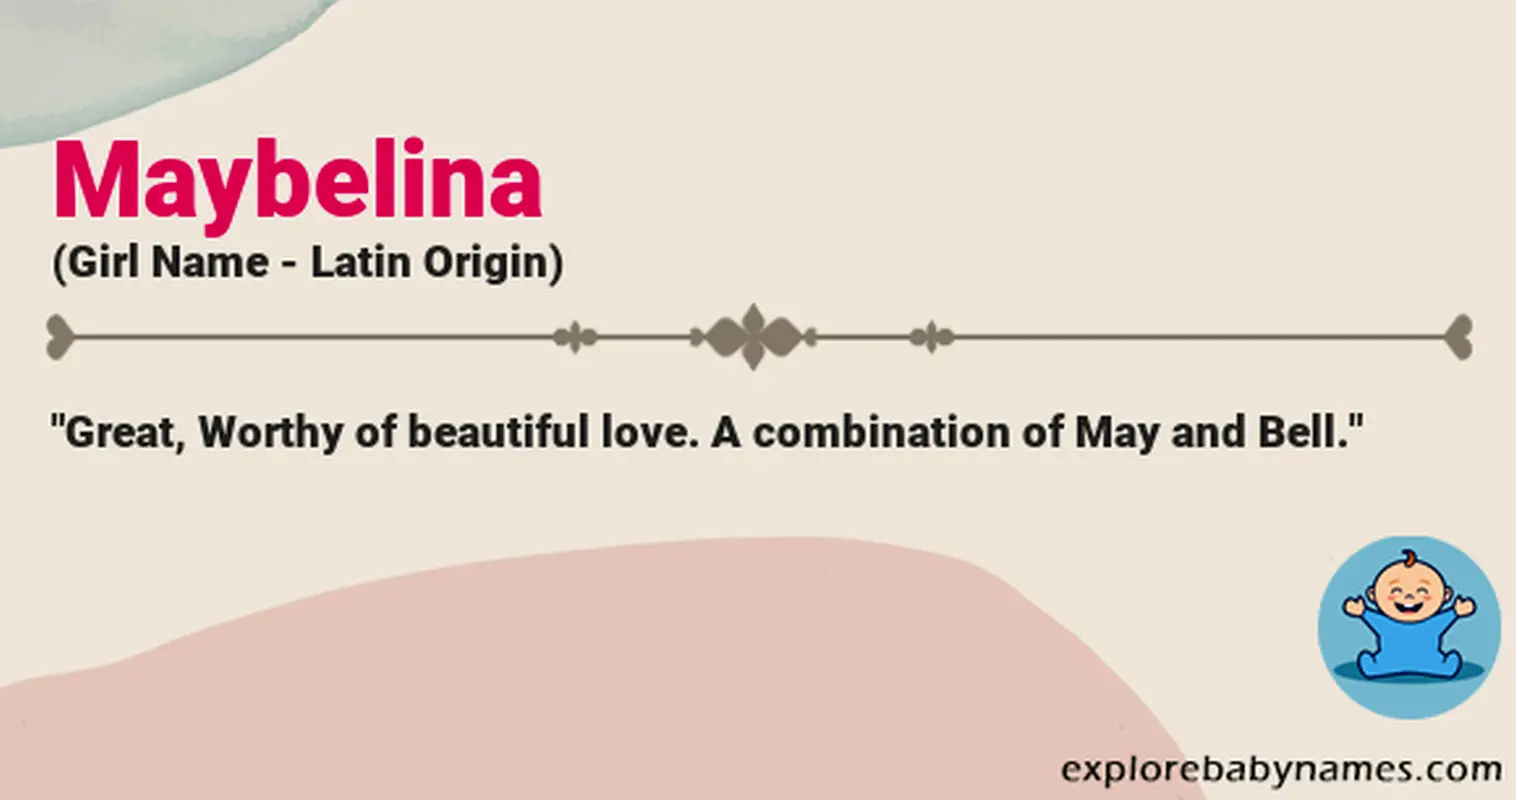 Meaning of Maybelina